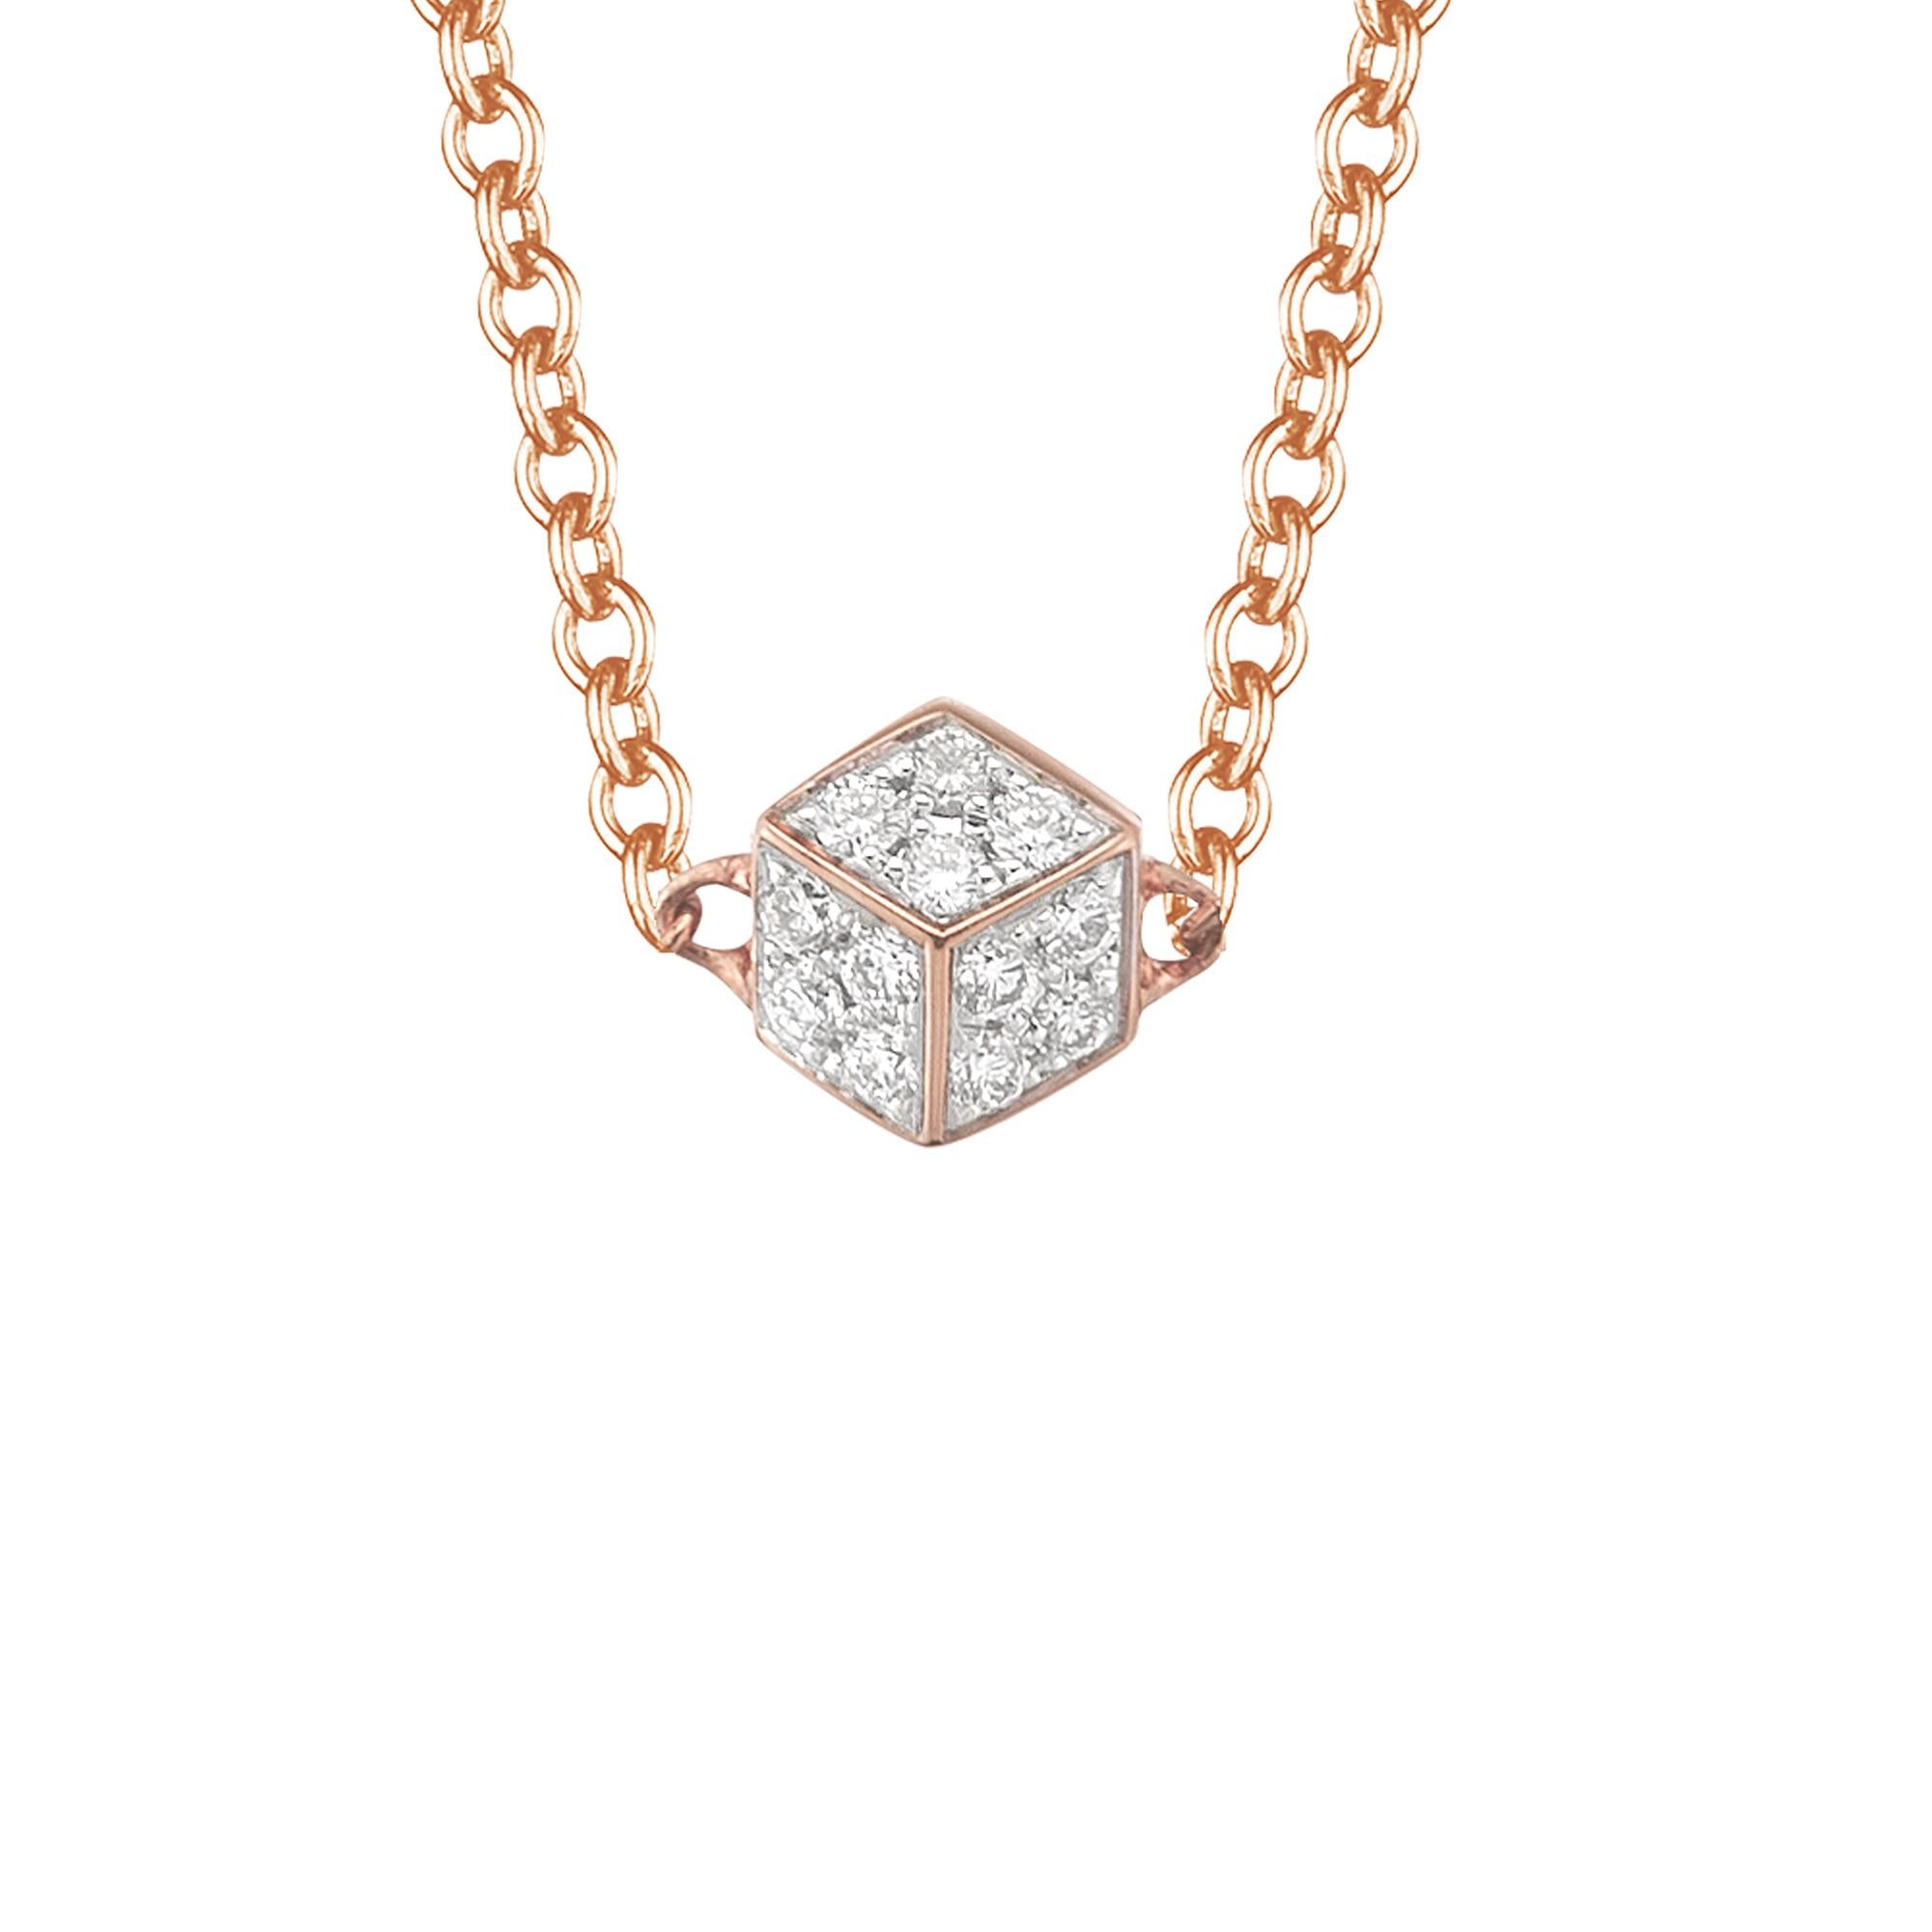 High polish 18kt rose gold Brillante® 'Natalie' pendant necklace with pave-set round brilliant diamonds.

Utterly charming, this rose gold Natalie necklace features a delicate chain and an incredibly detailed Brillante diamond pendant. The necklace